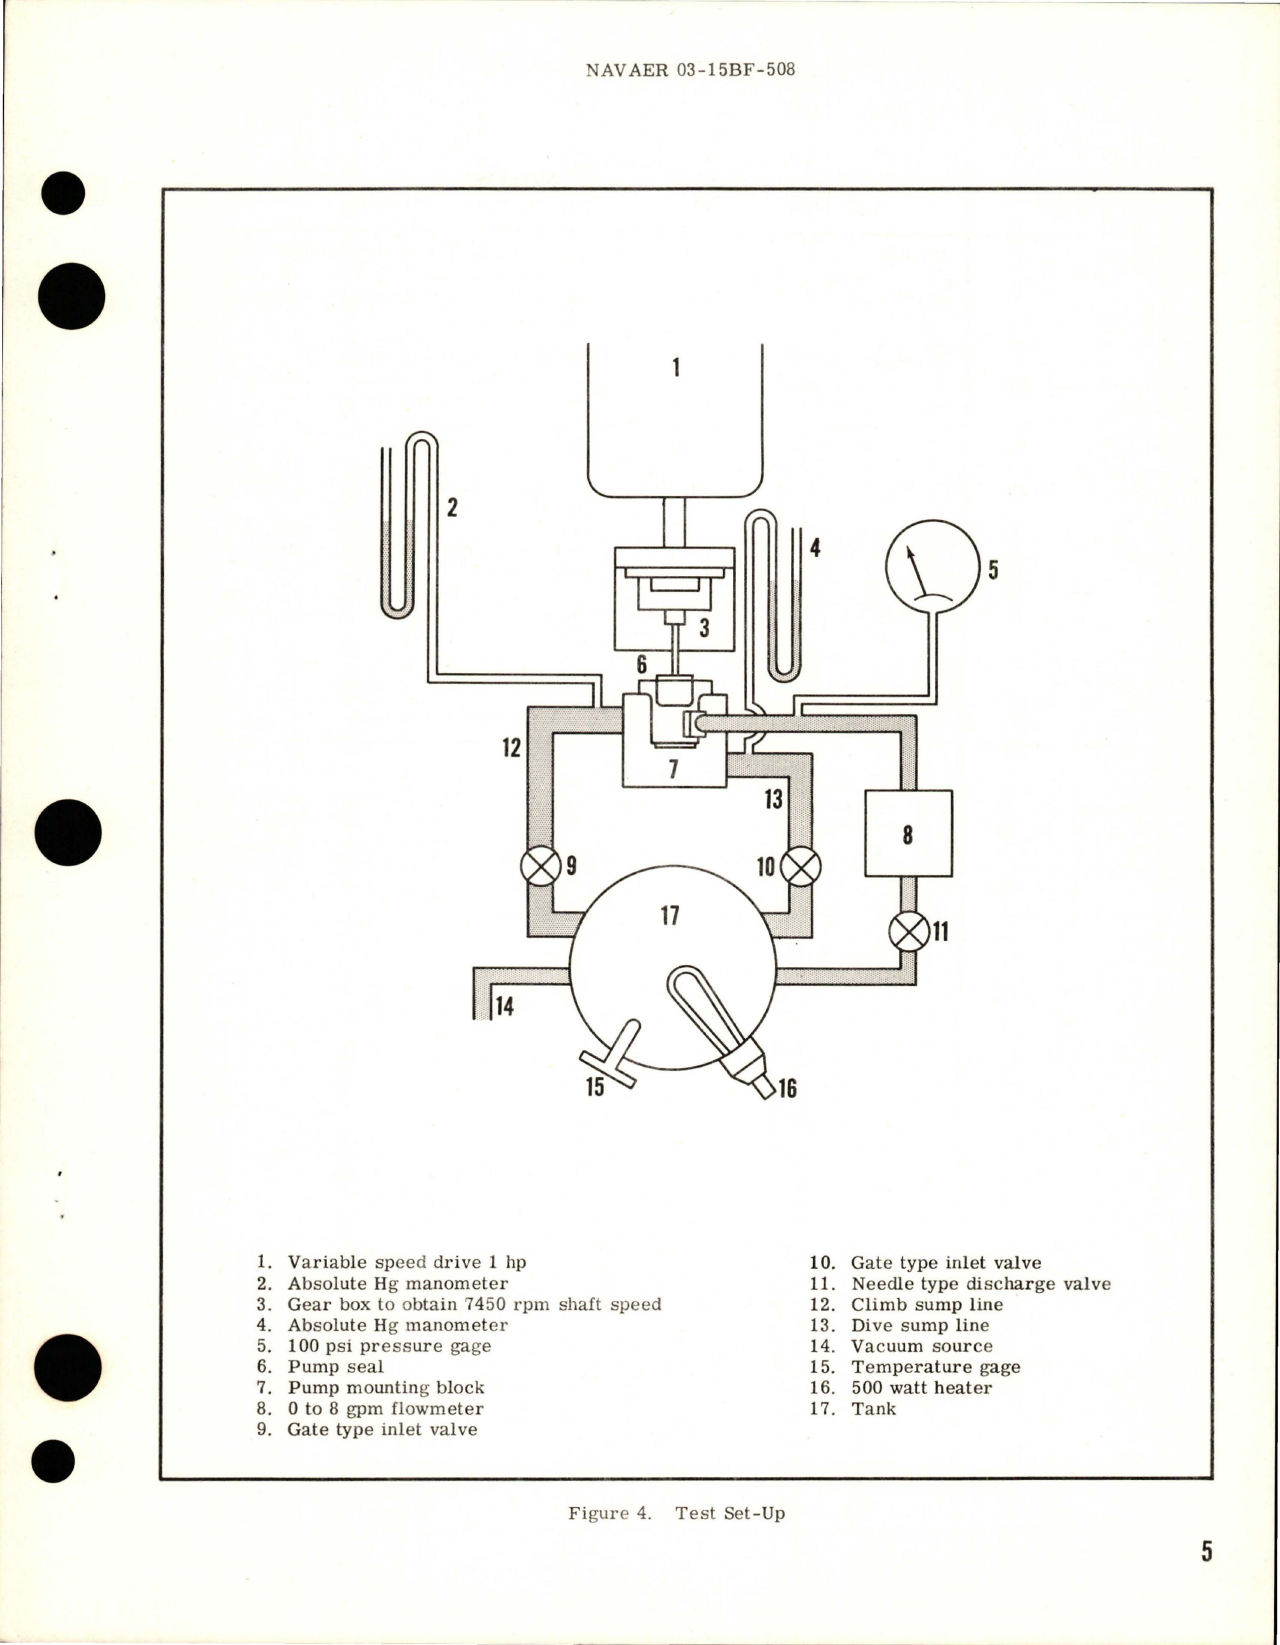 Sample page 5 from AirCorps Library document: Overhaul Instructions with Parts Breakdown for Oil Scavenge Pump - No. 3 - Models RD16250 and RG16250B